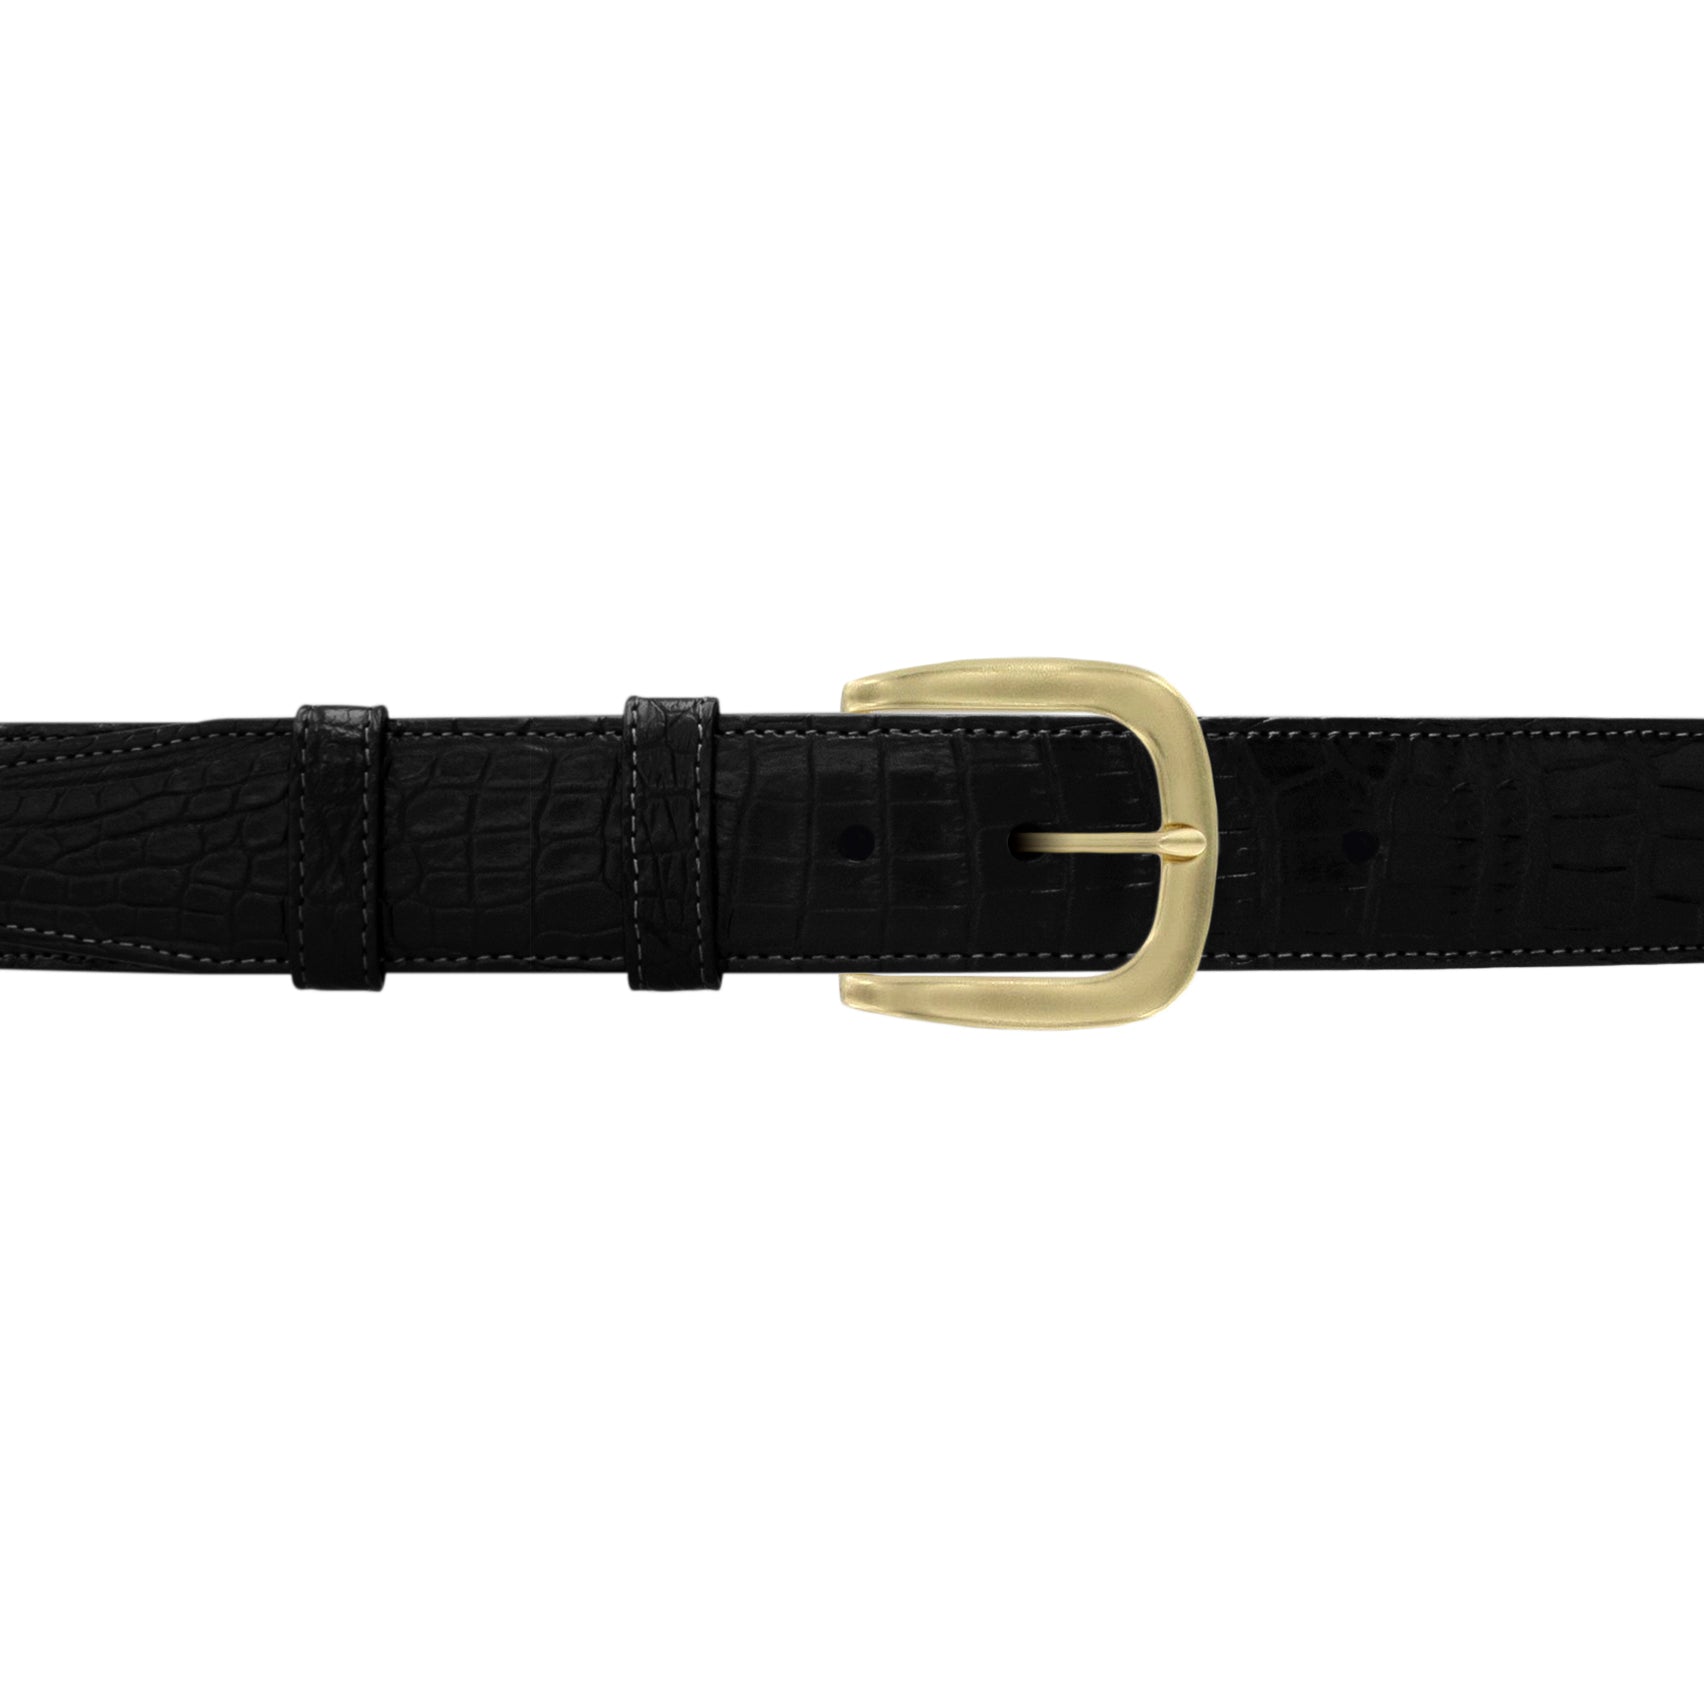 1 1/2" Raven Classic Belt with Oxford Cocktail Buckle in Brass